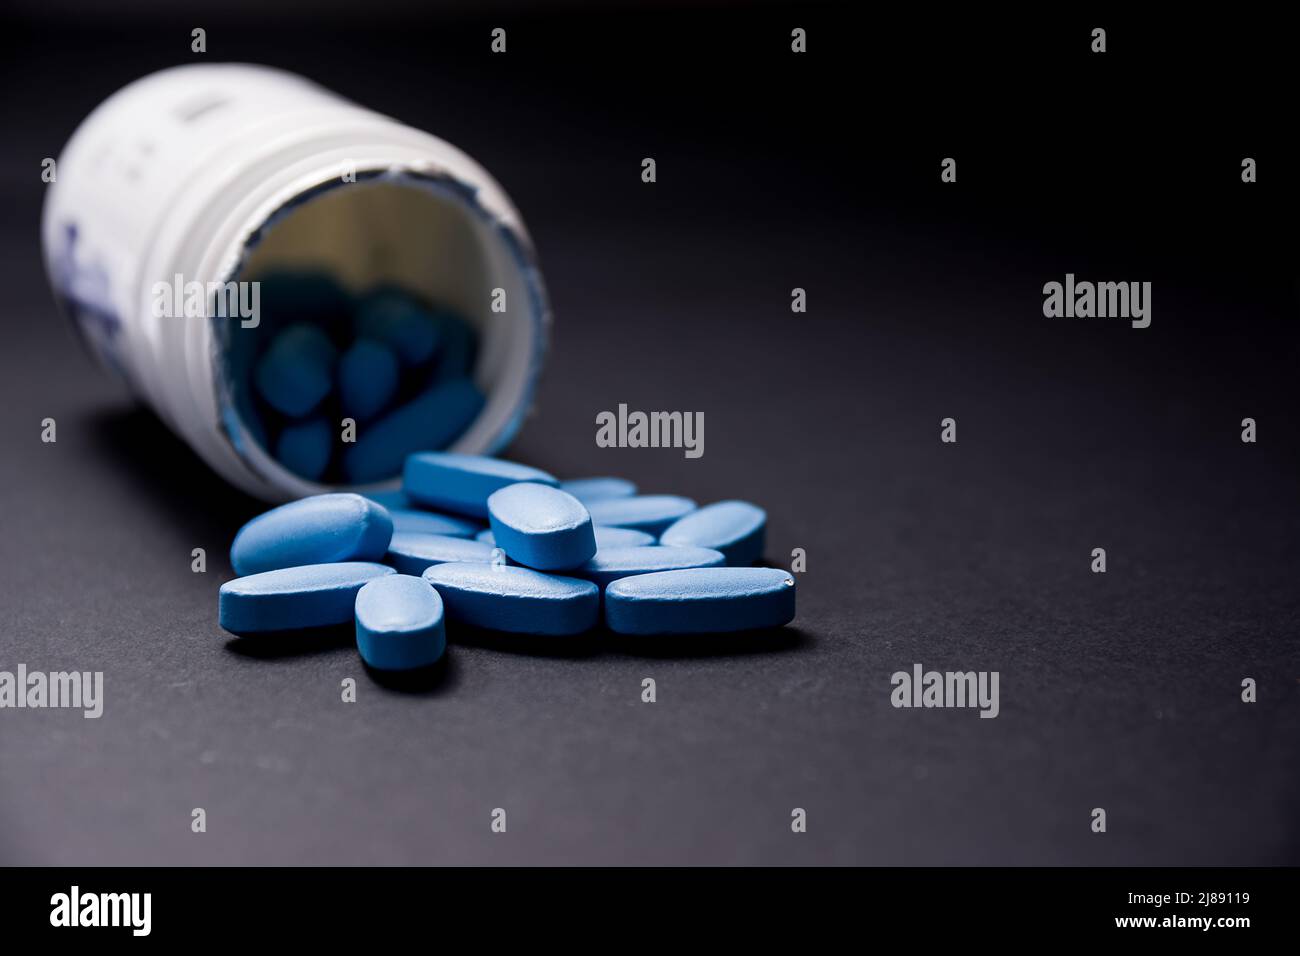 Blue pills in the foreground come out of the white plastic container in the blurred background Stock Photo